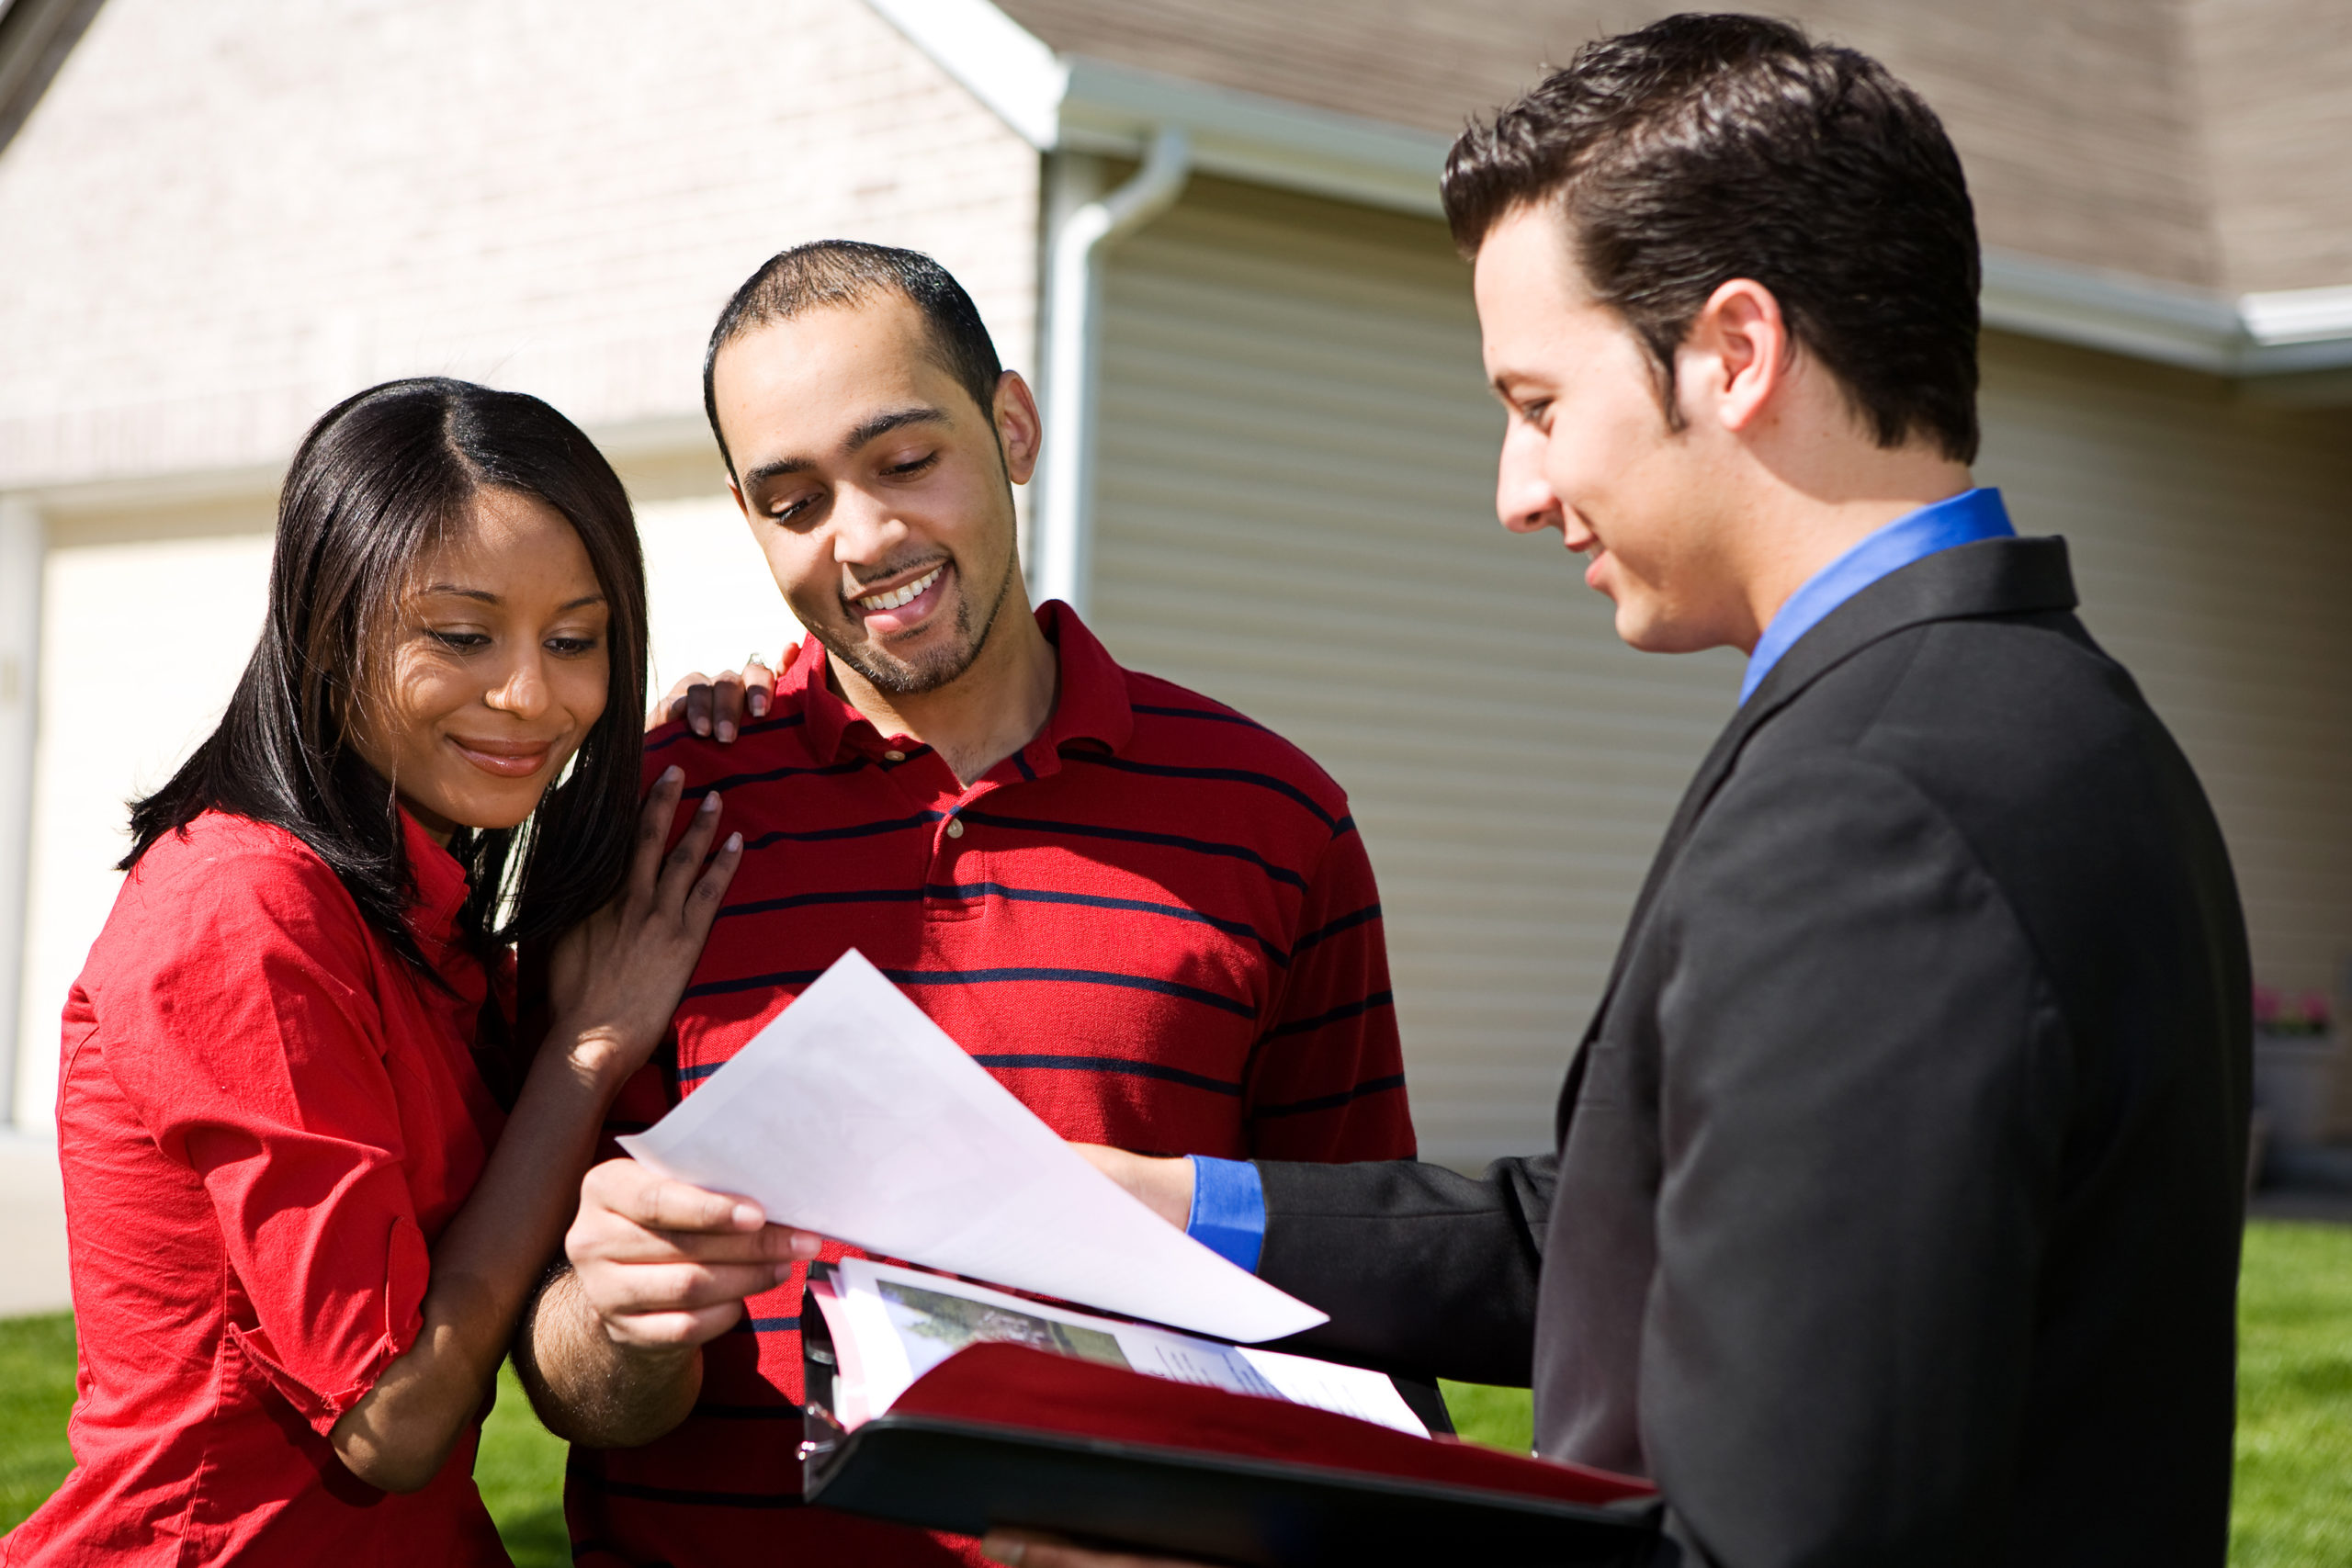 Male real estate agent stands outside newly sold house with man and woman, handing them completed home ownership paperwork.